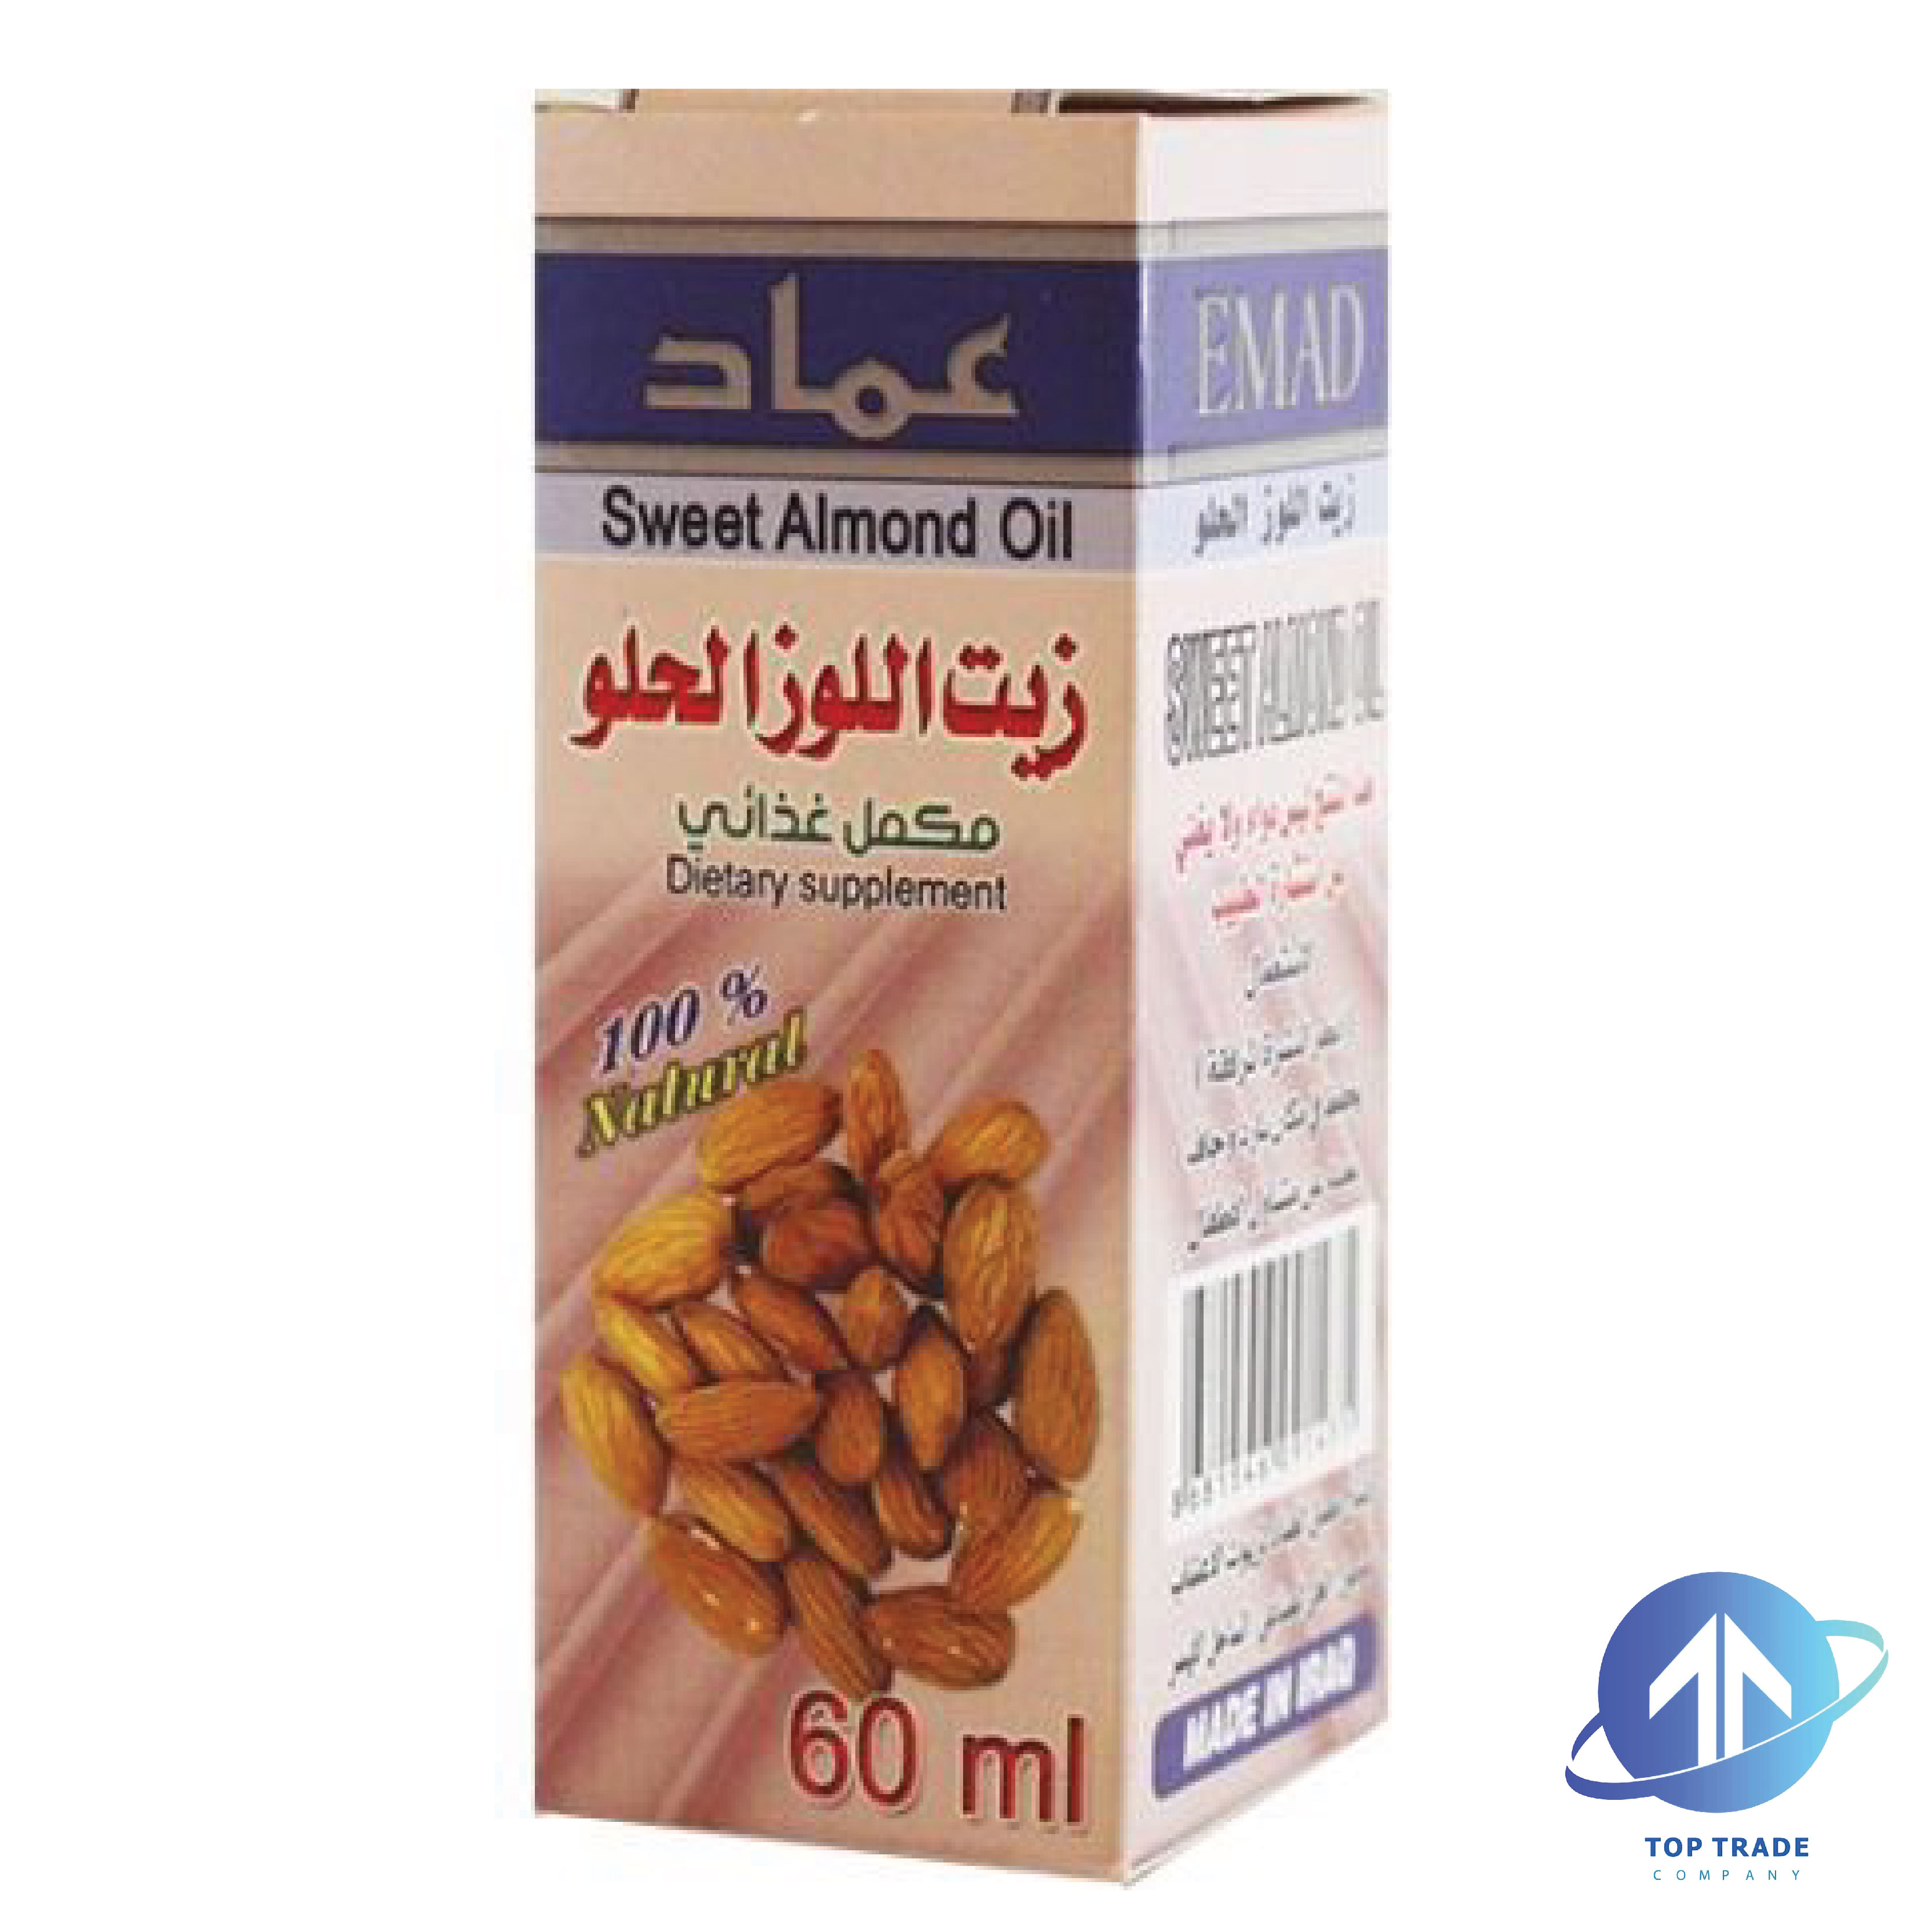 Emad Sweet almond oil 60ML